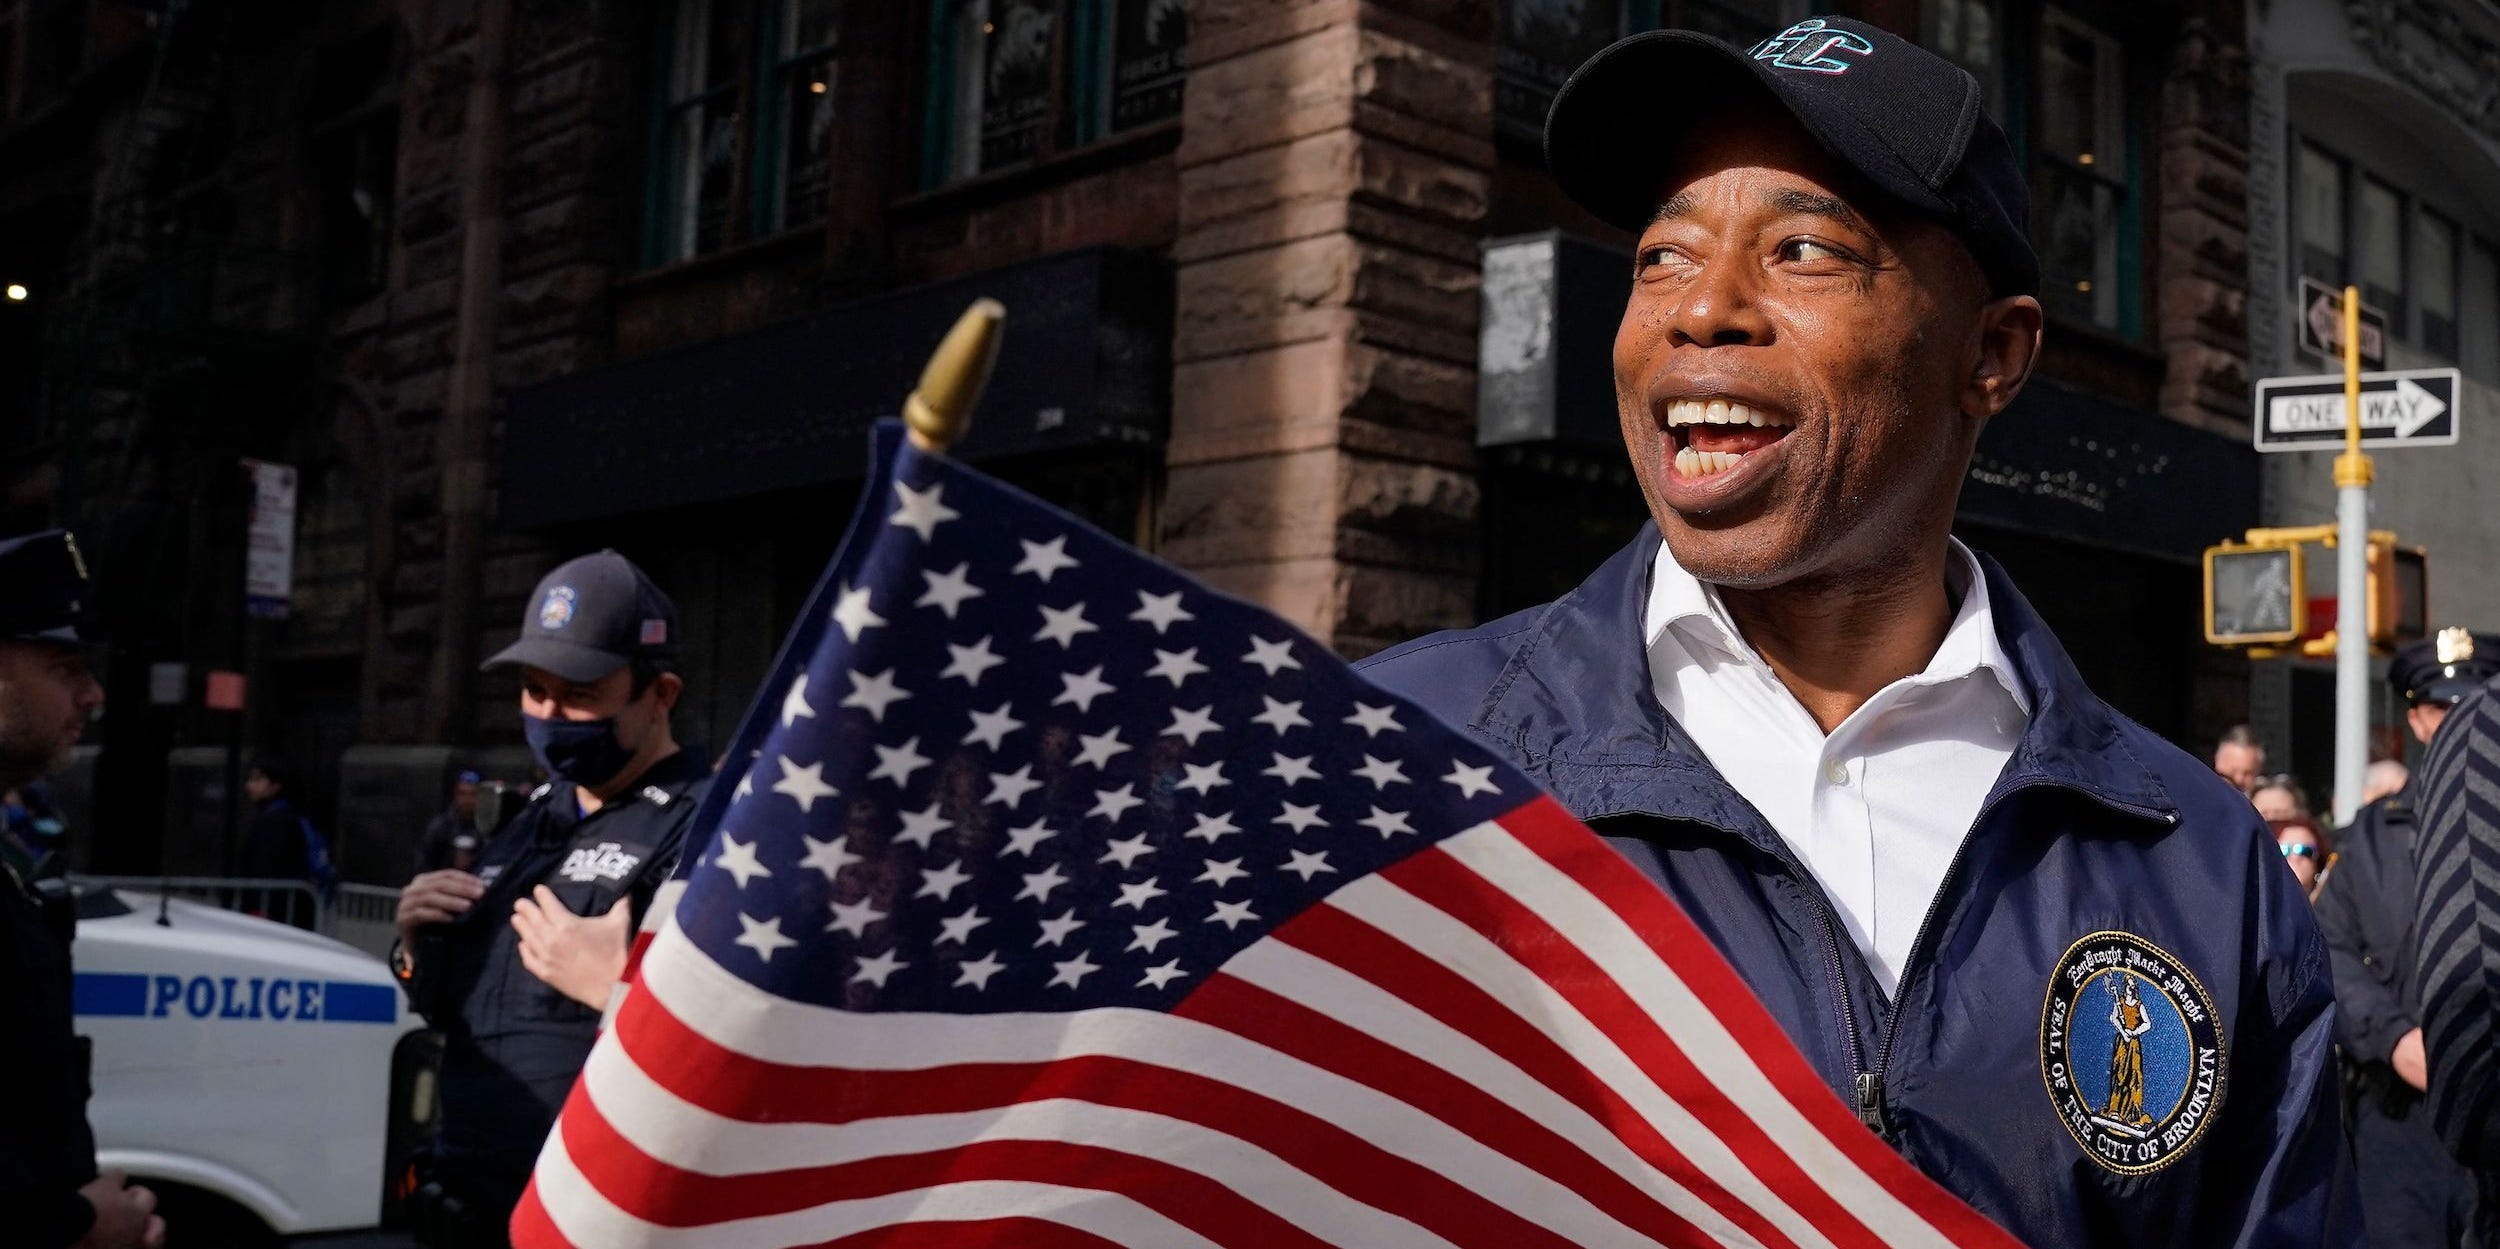 Eric Adams waves a slightly larger than miniature but not quite as big as a full-sized American flag while wearing a baseball cap and a Brooklyn borough windbreaker.